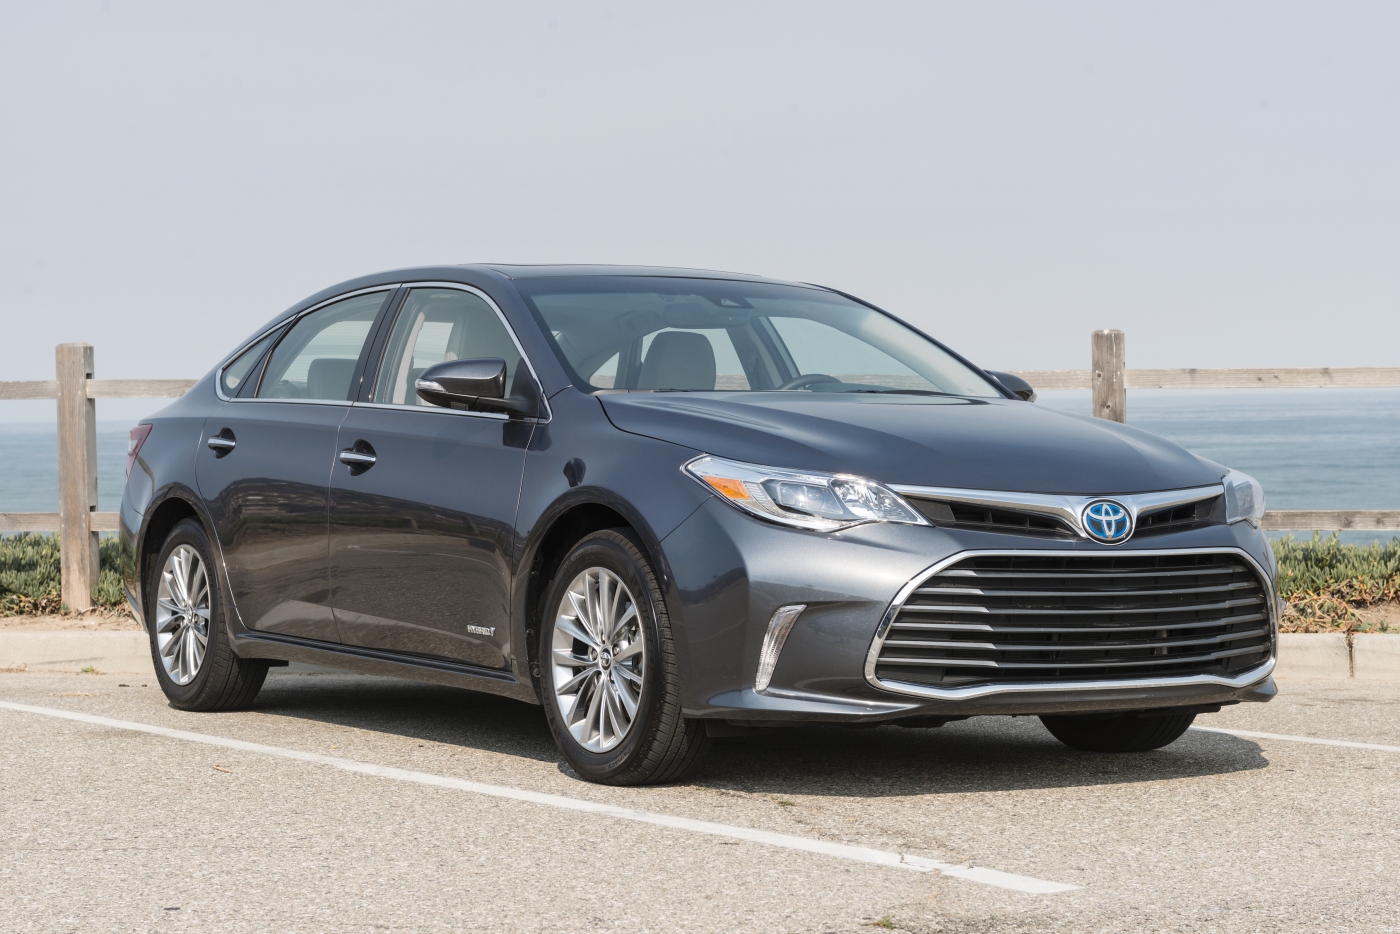 2016 Toyota Avalon Limited Hybrid: A DriveWays Review – The Review Garage